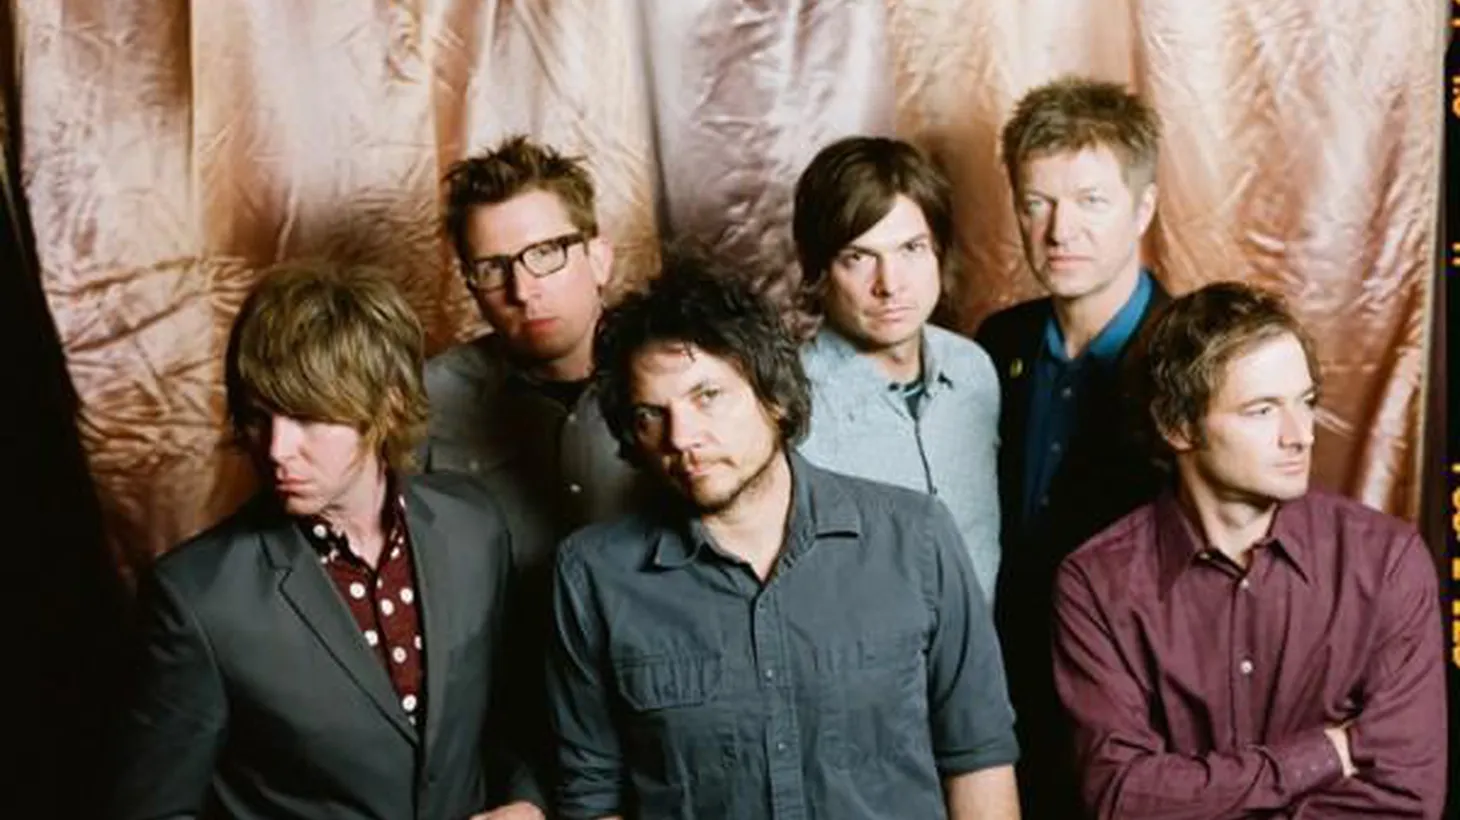 Gary Calamar catches up with Wilco's Jeff Tweedy to see what we can look forward to when they return to Los Angeles for a show at the Hollywood Bowl. (10am)